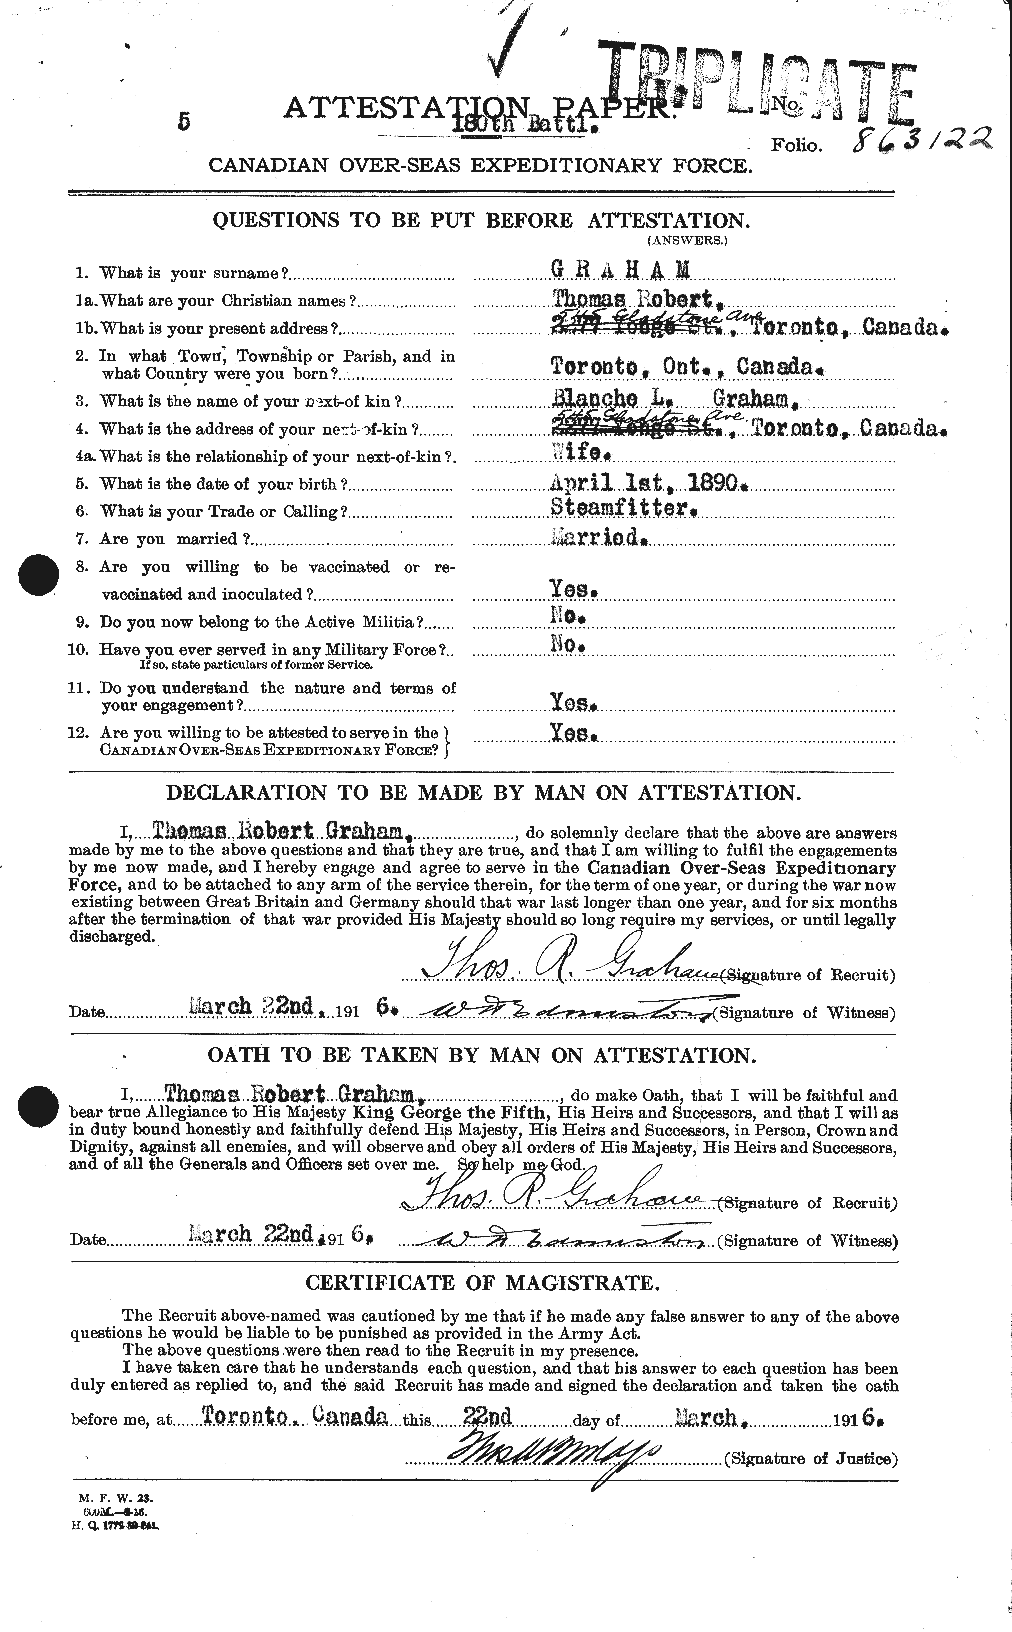 Personnel Records of the First World War - CEF 359528a